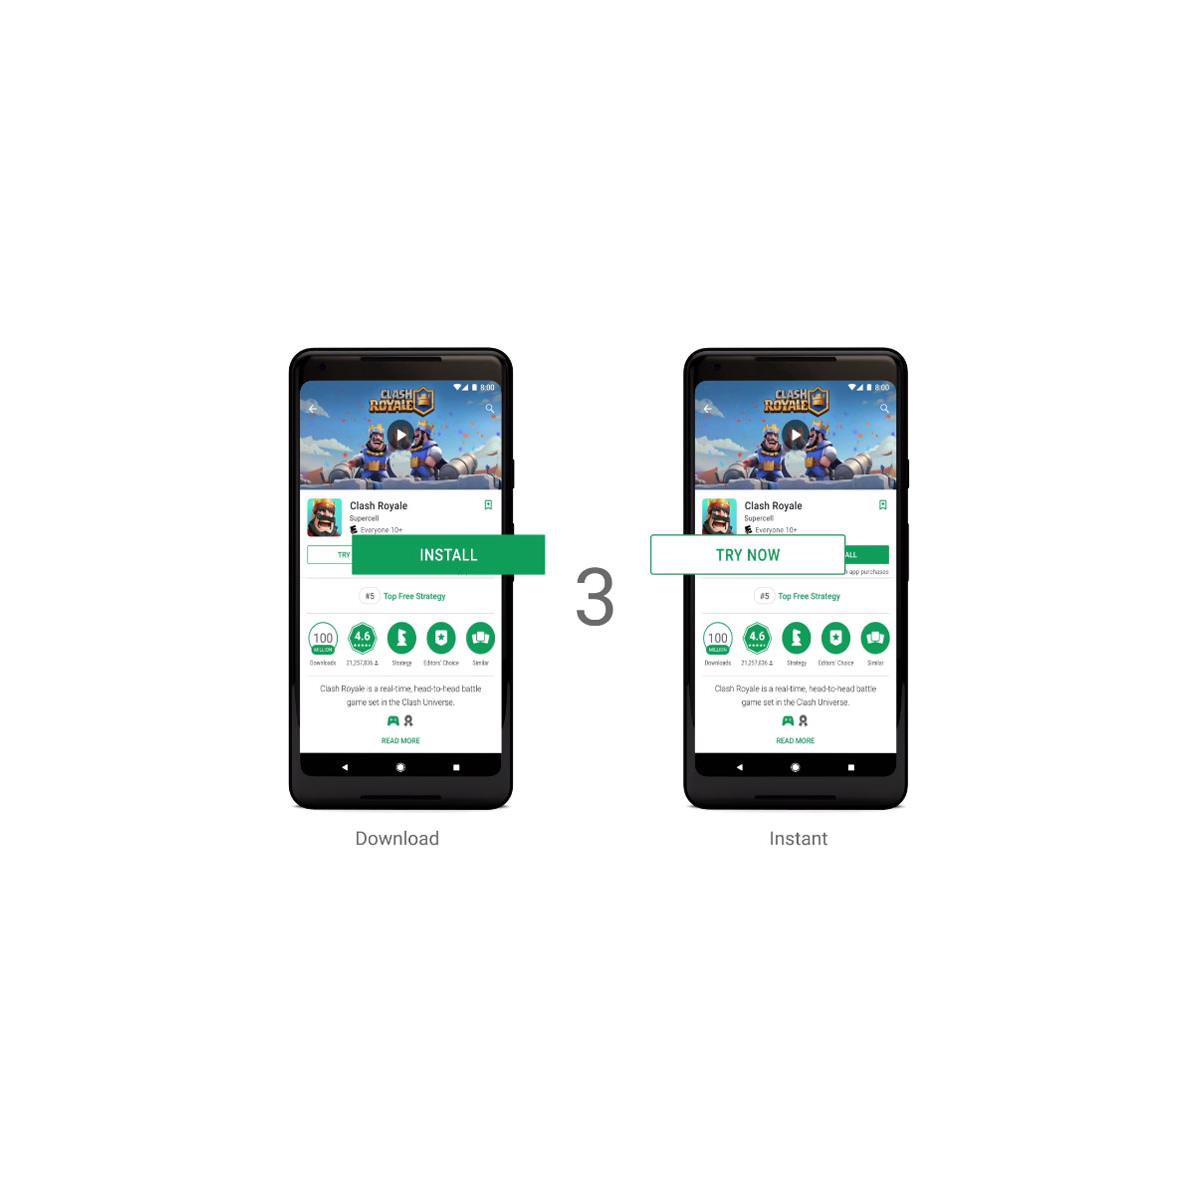 Google Play Instant games let you play first, download later